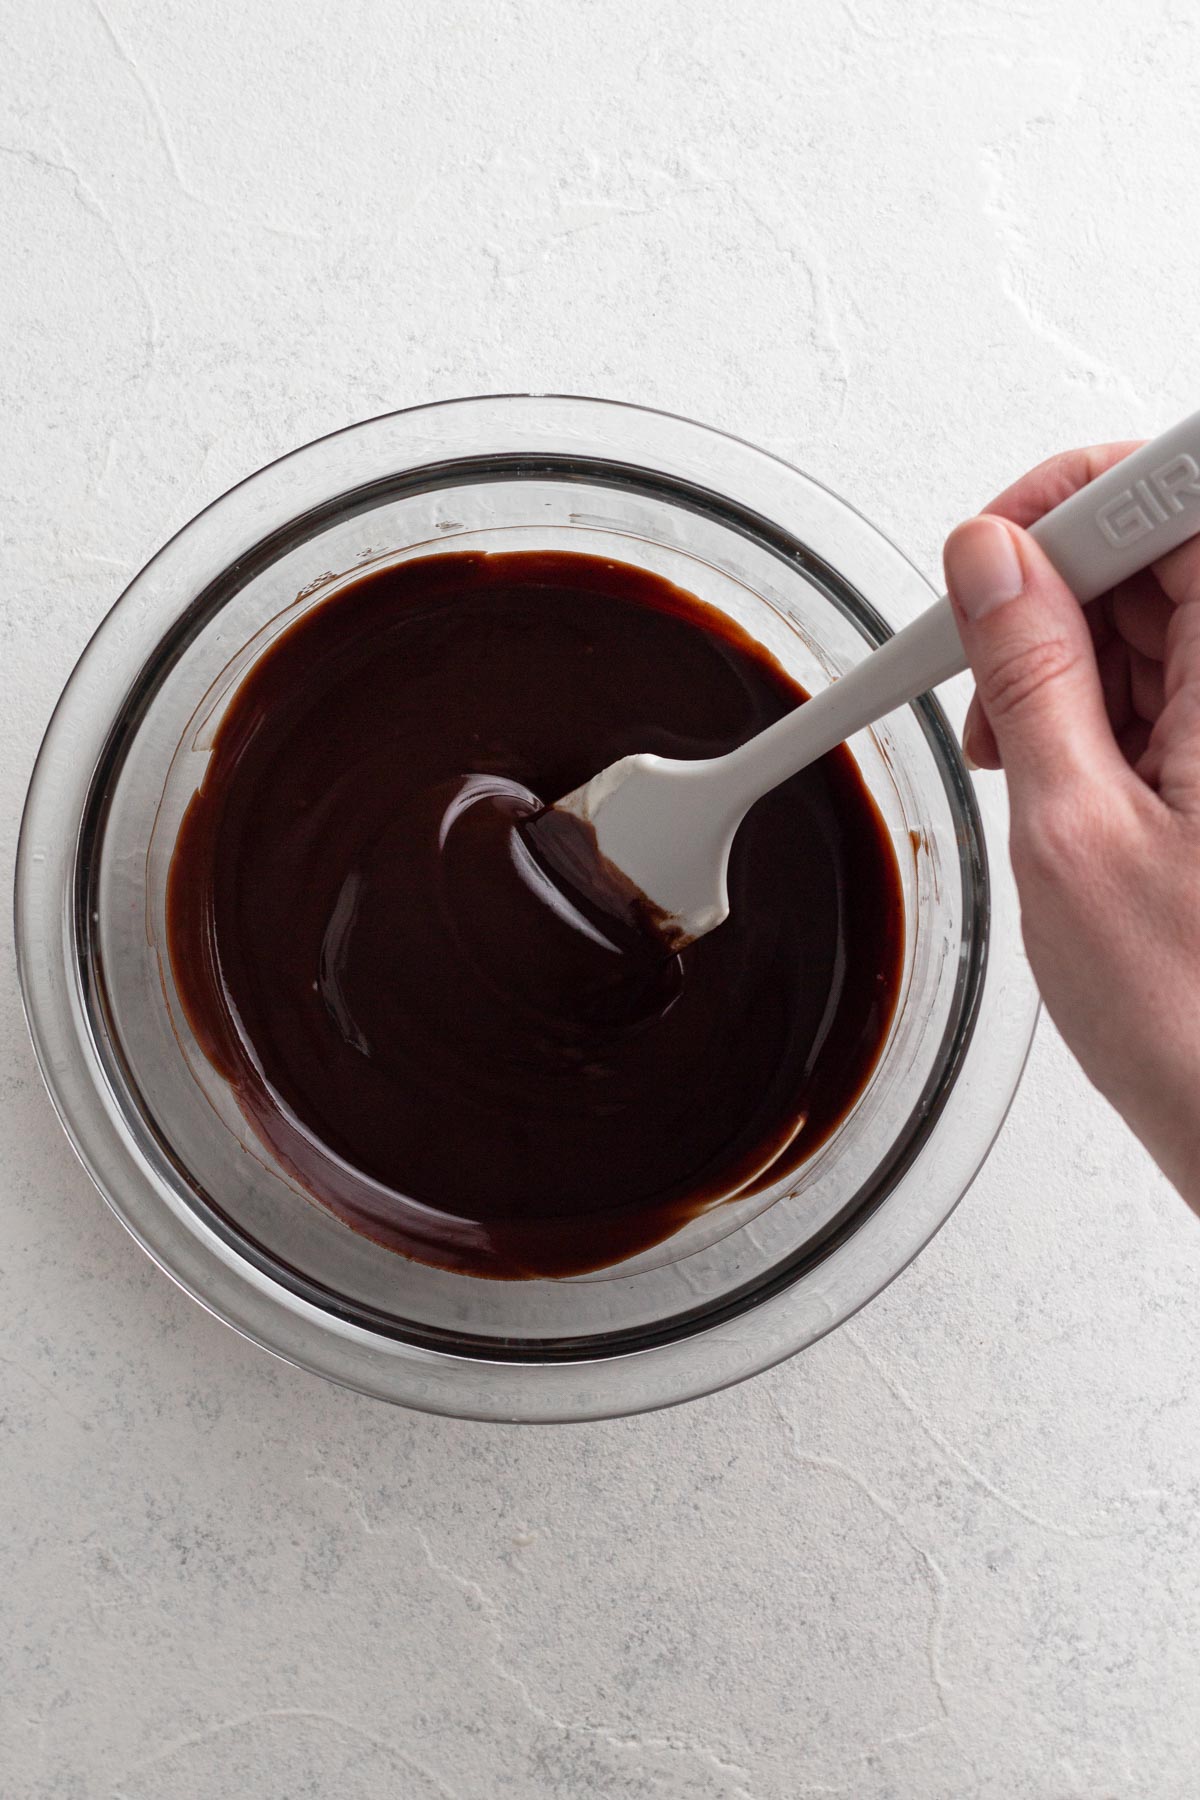 Hand mixing chocolate ganache in a glass mixing bowl with a white spatula.